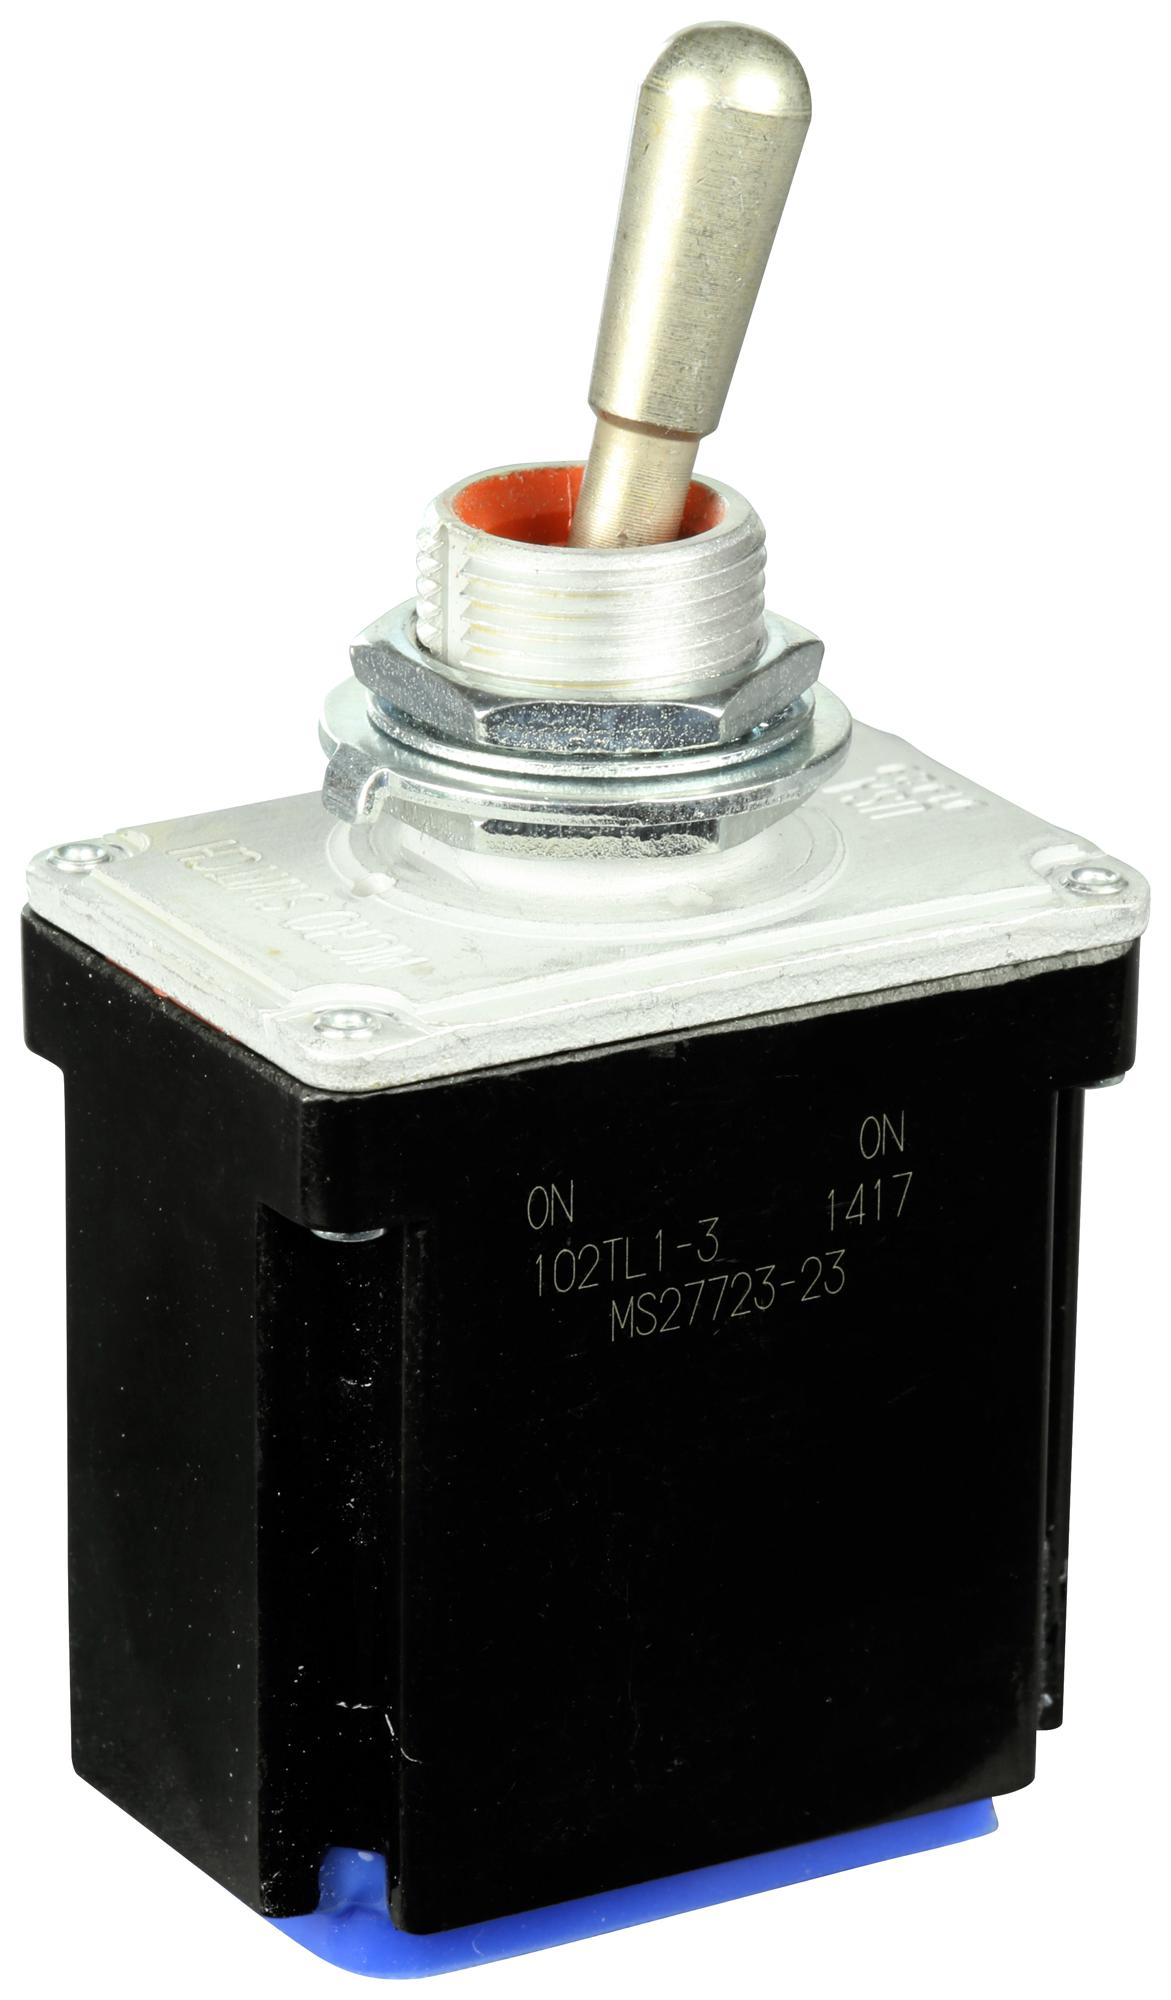 102TL1-3 TOGGLE SWITCH, DPDT, 20A, 277VAC/250VDC HONEYWELL